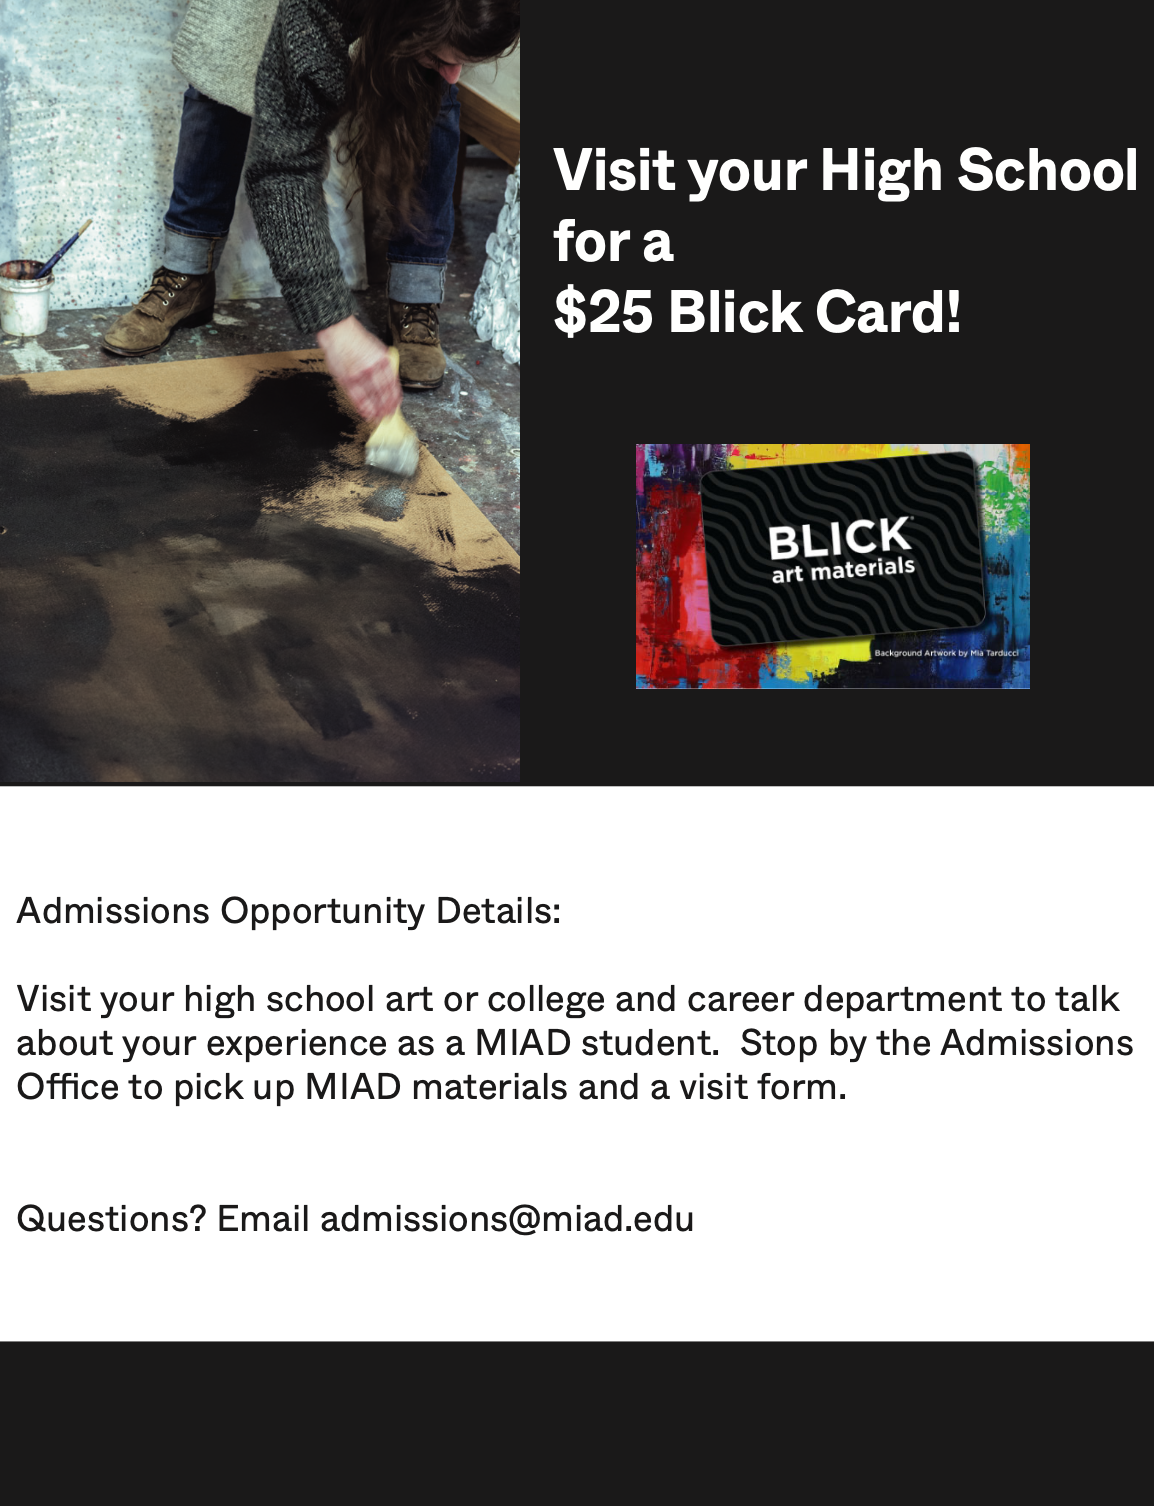 Visit your high school for a $25 Blick Card!